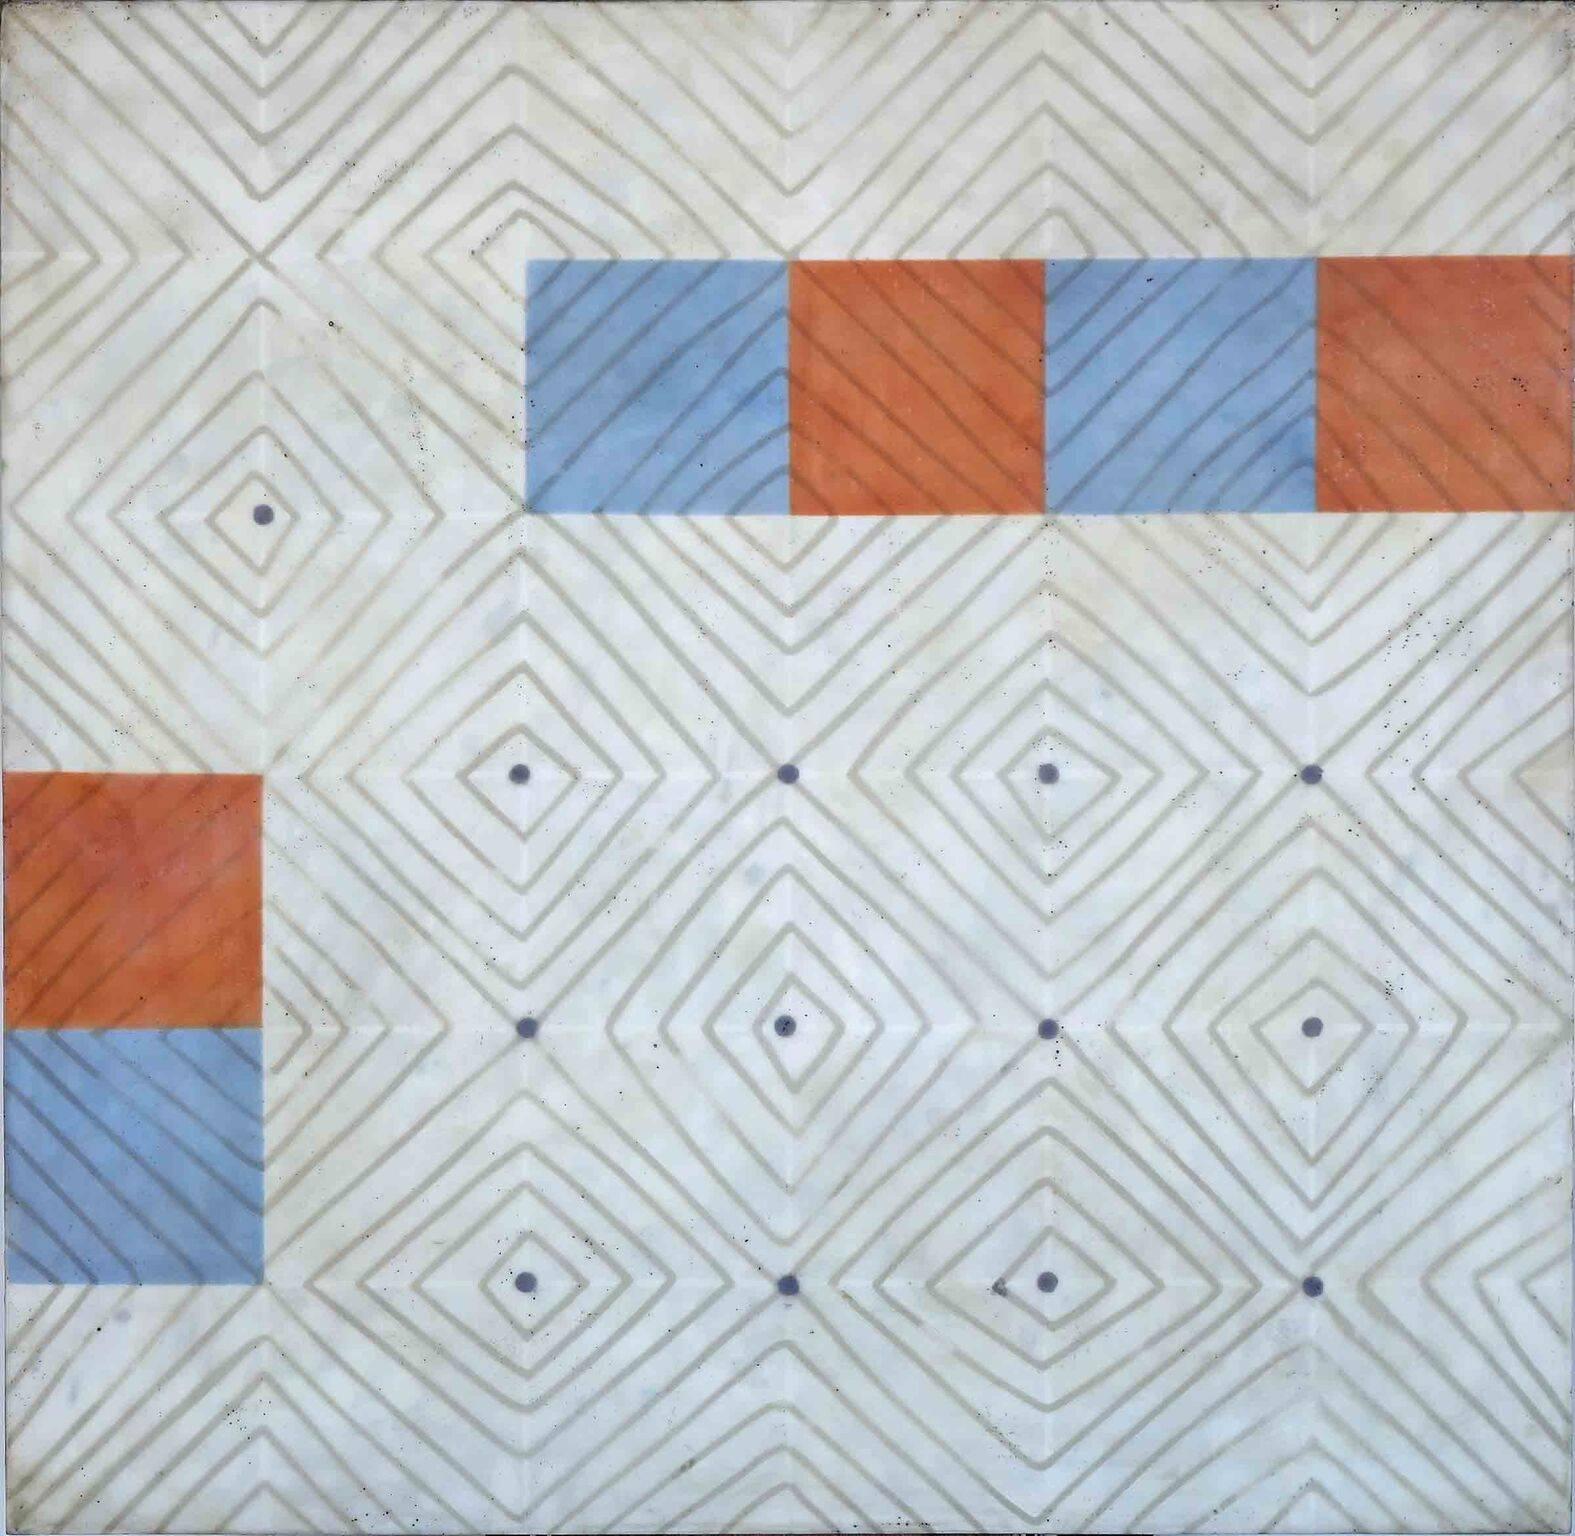 Diamonds 1 (Abstract Blue White and Orange Encaustic Square Work on Panel)